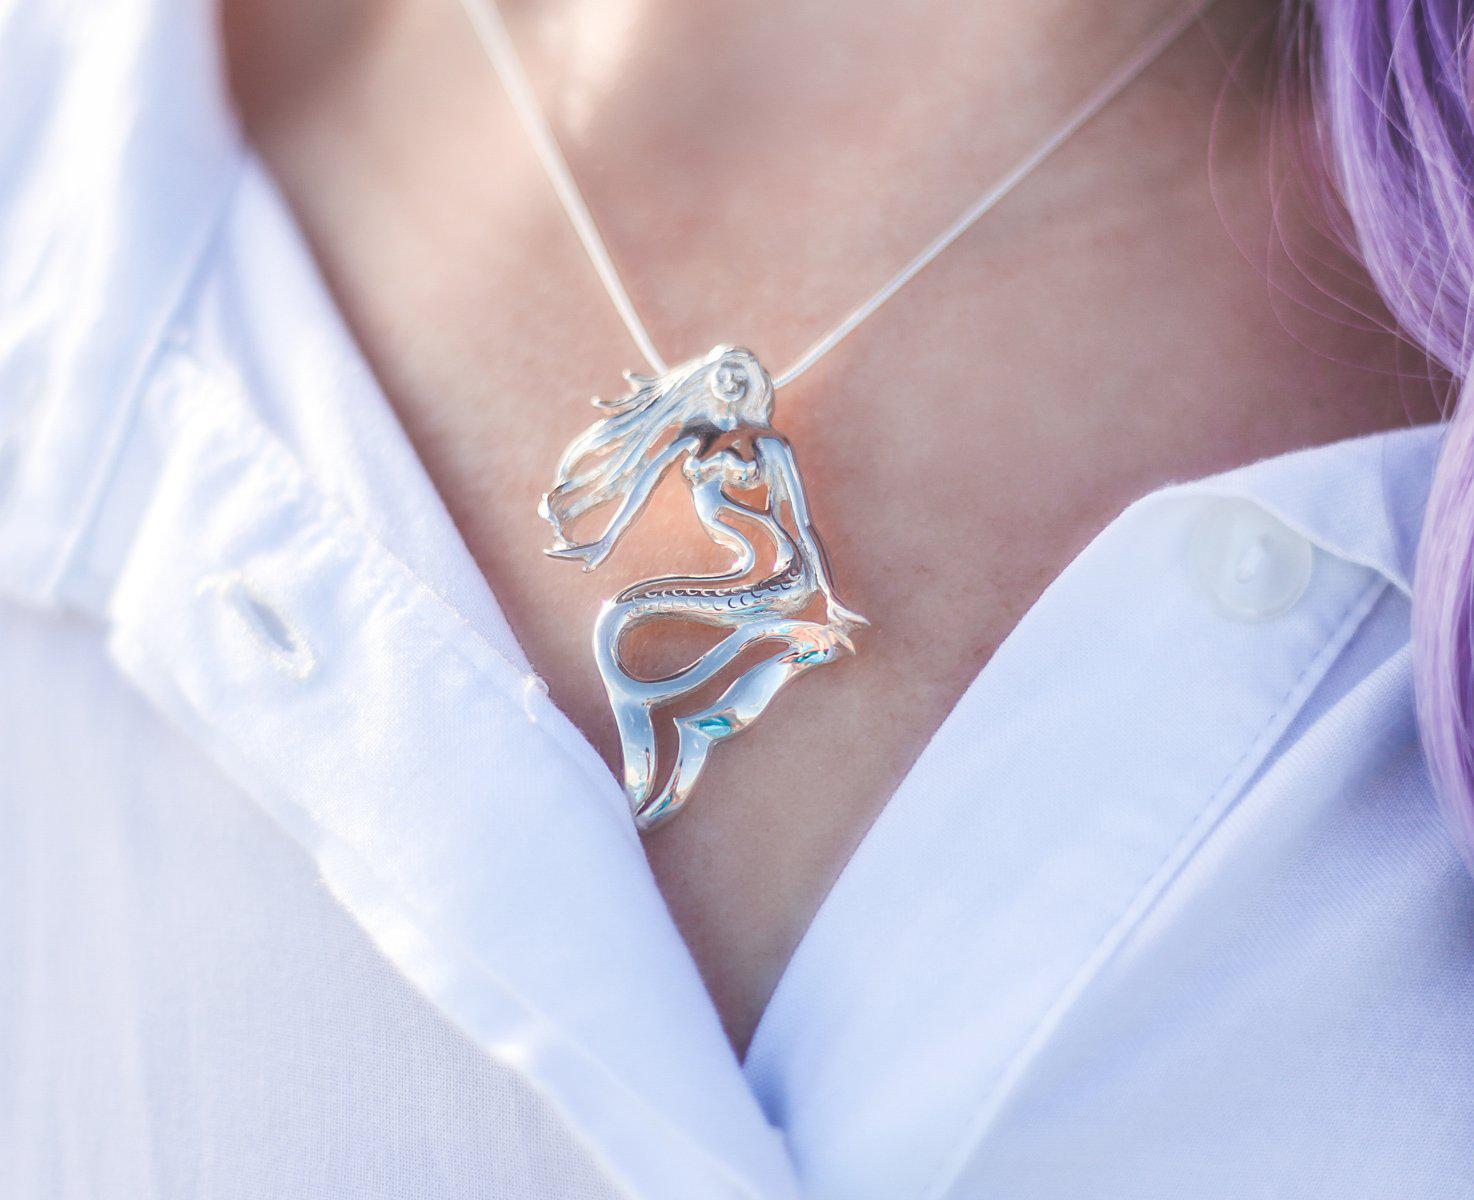 Mermaid Jewelry for Women Solid Bronze- Mermaid Necklaces for Women, Mermaid Gifts for Adults, Solid Bronze Mermaid Necklace, Little Mermaid  Gift Ideas for Adults